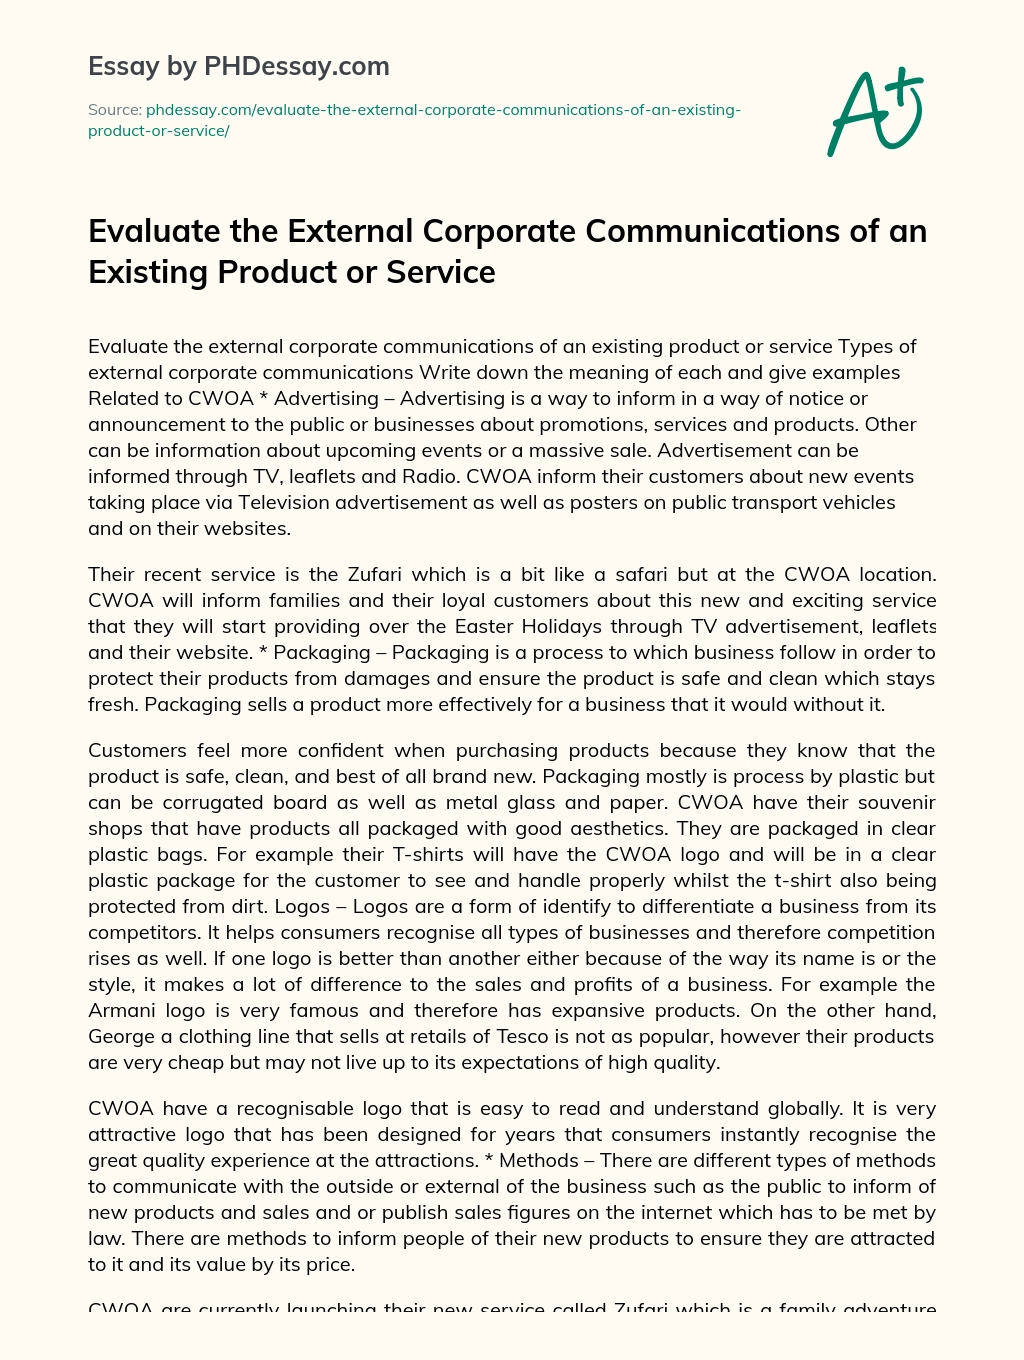 Evaluate the External Corporate Communications of an Existing Product or Service essay